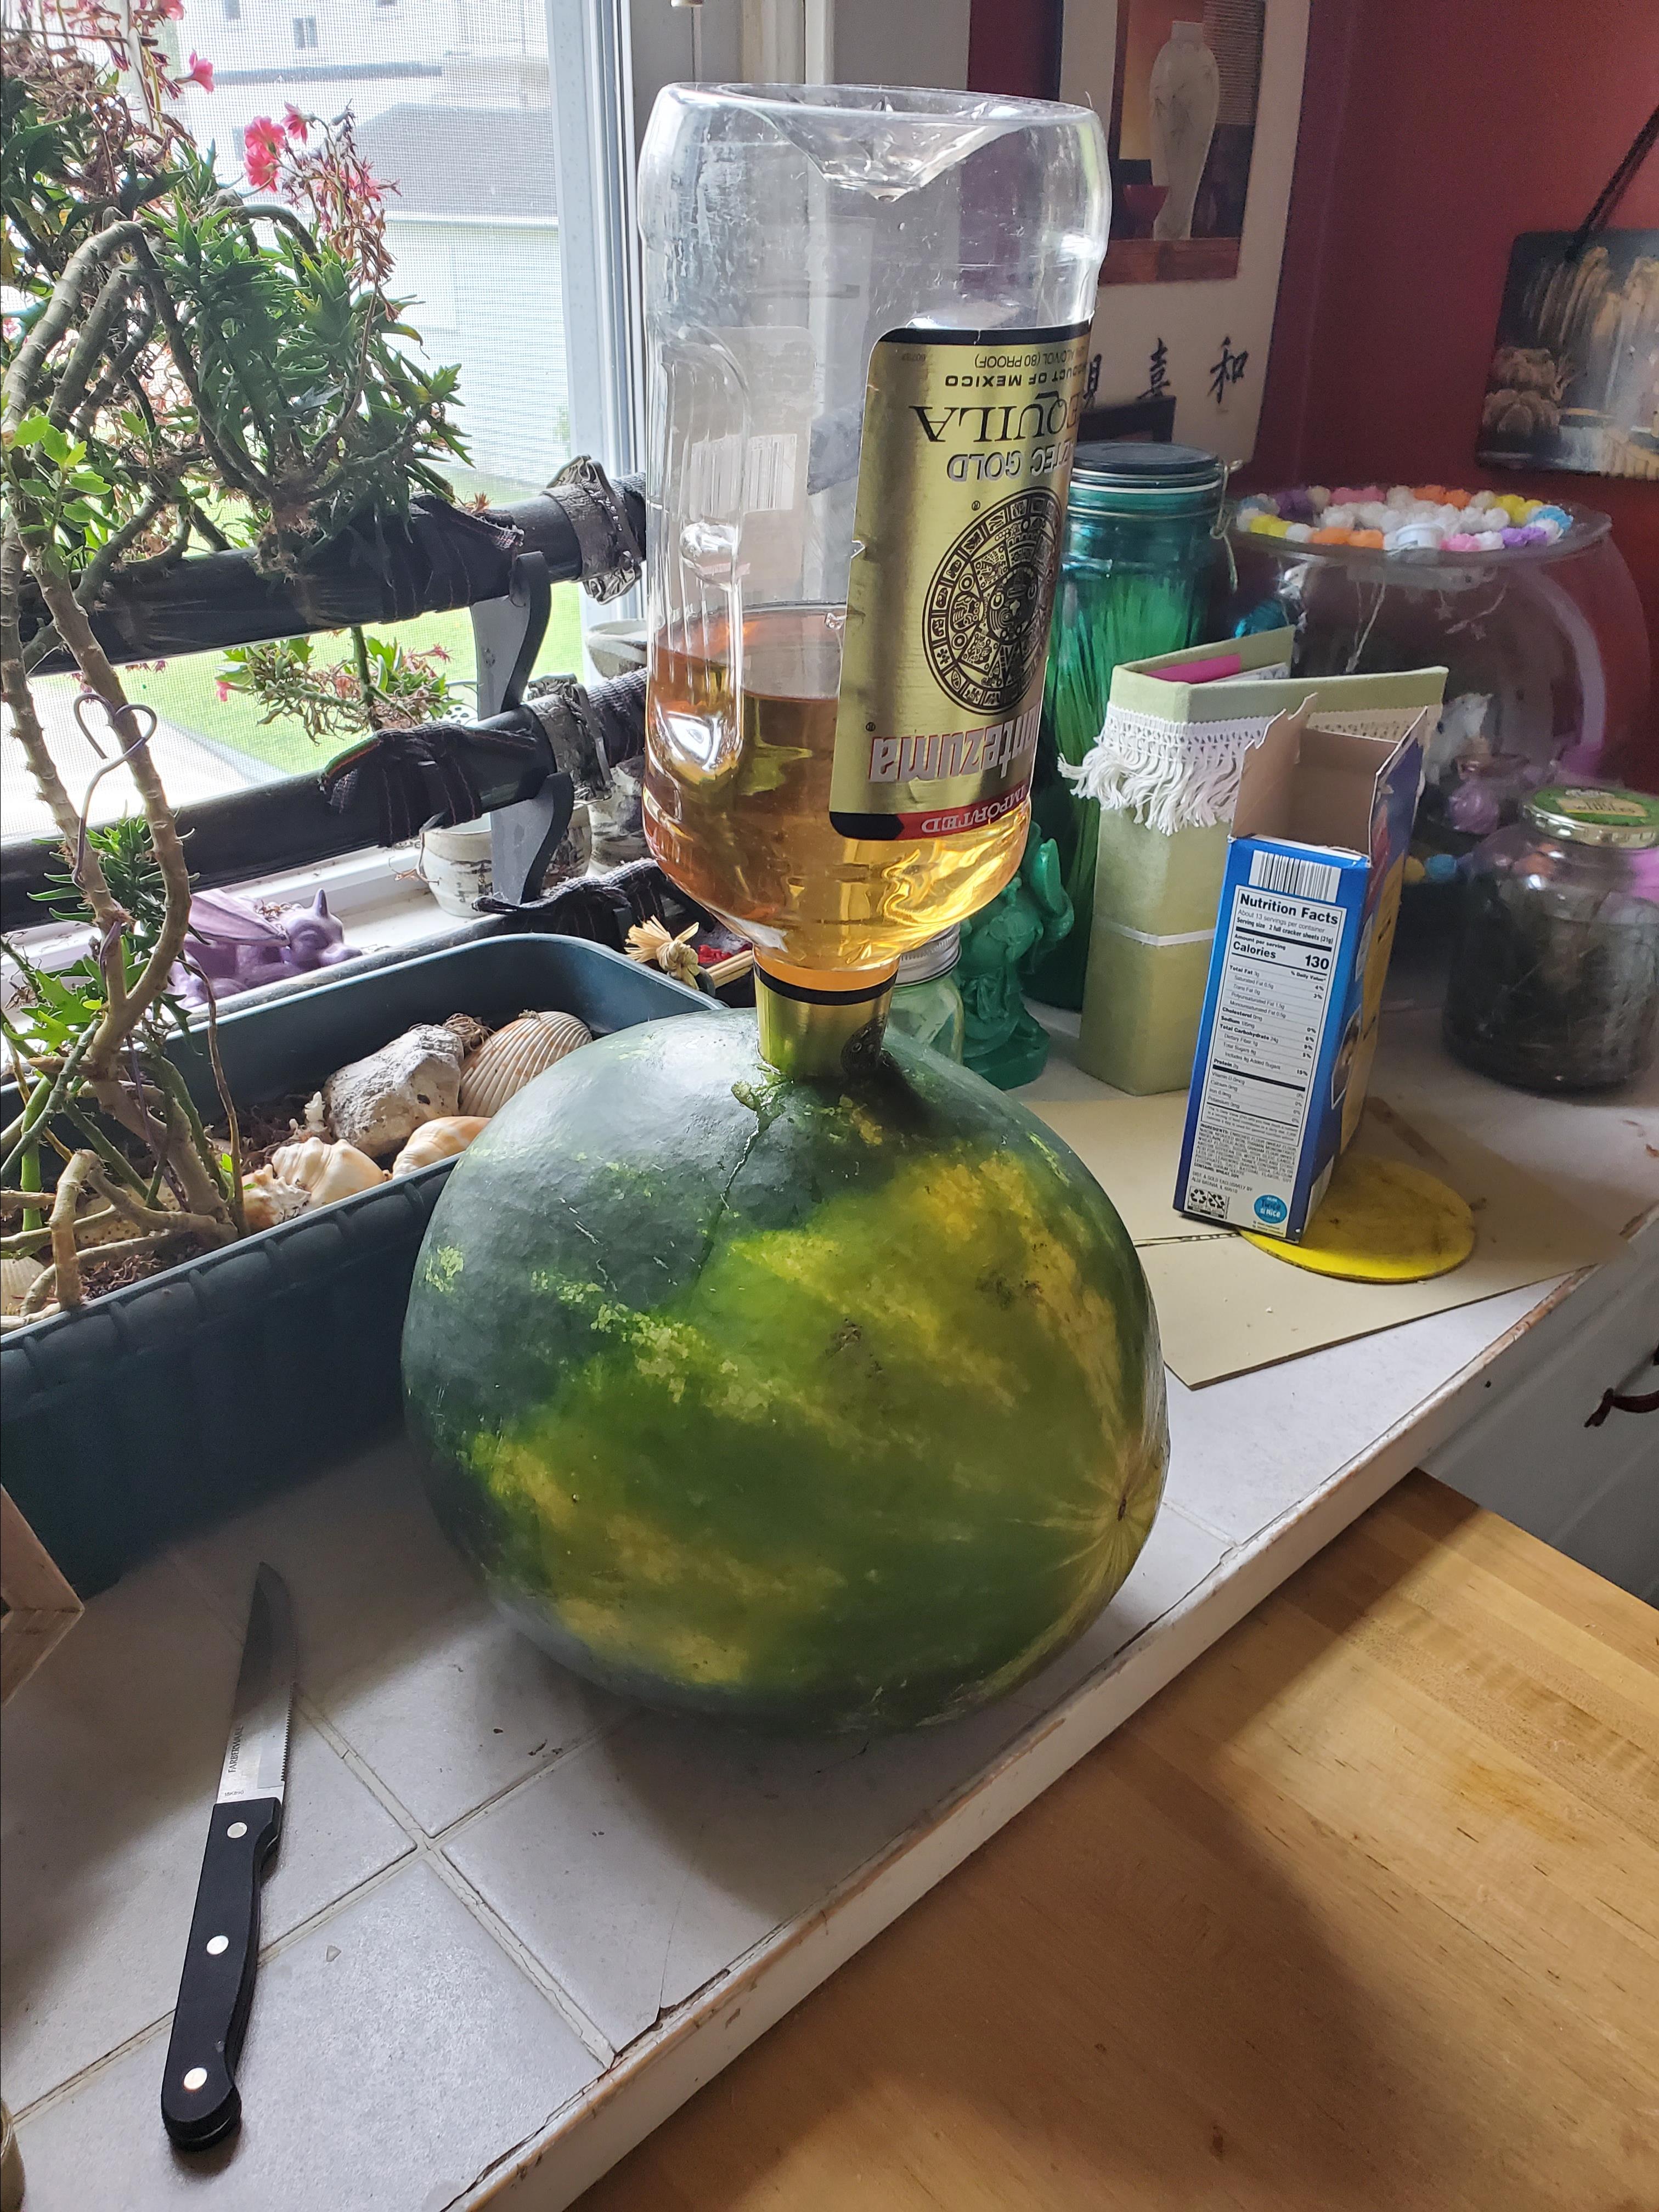 Adult Watermelon for BBQ